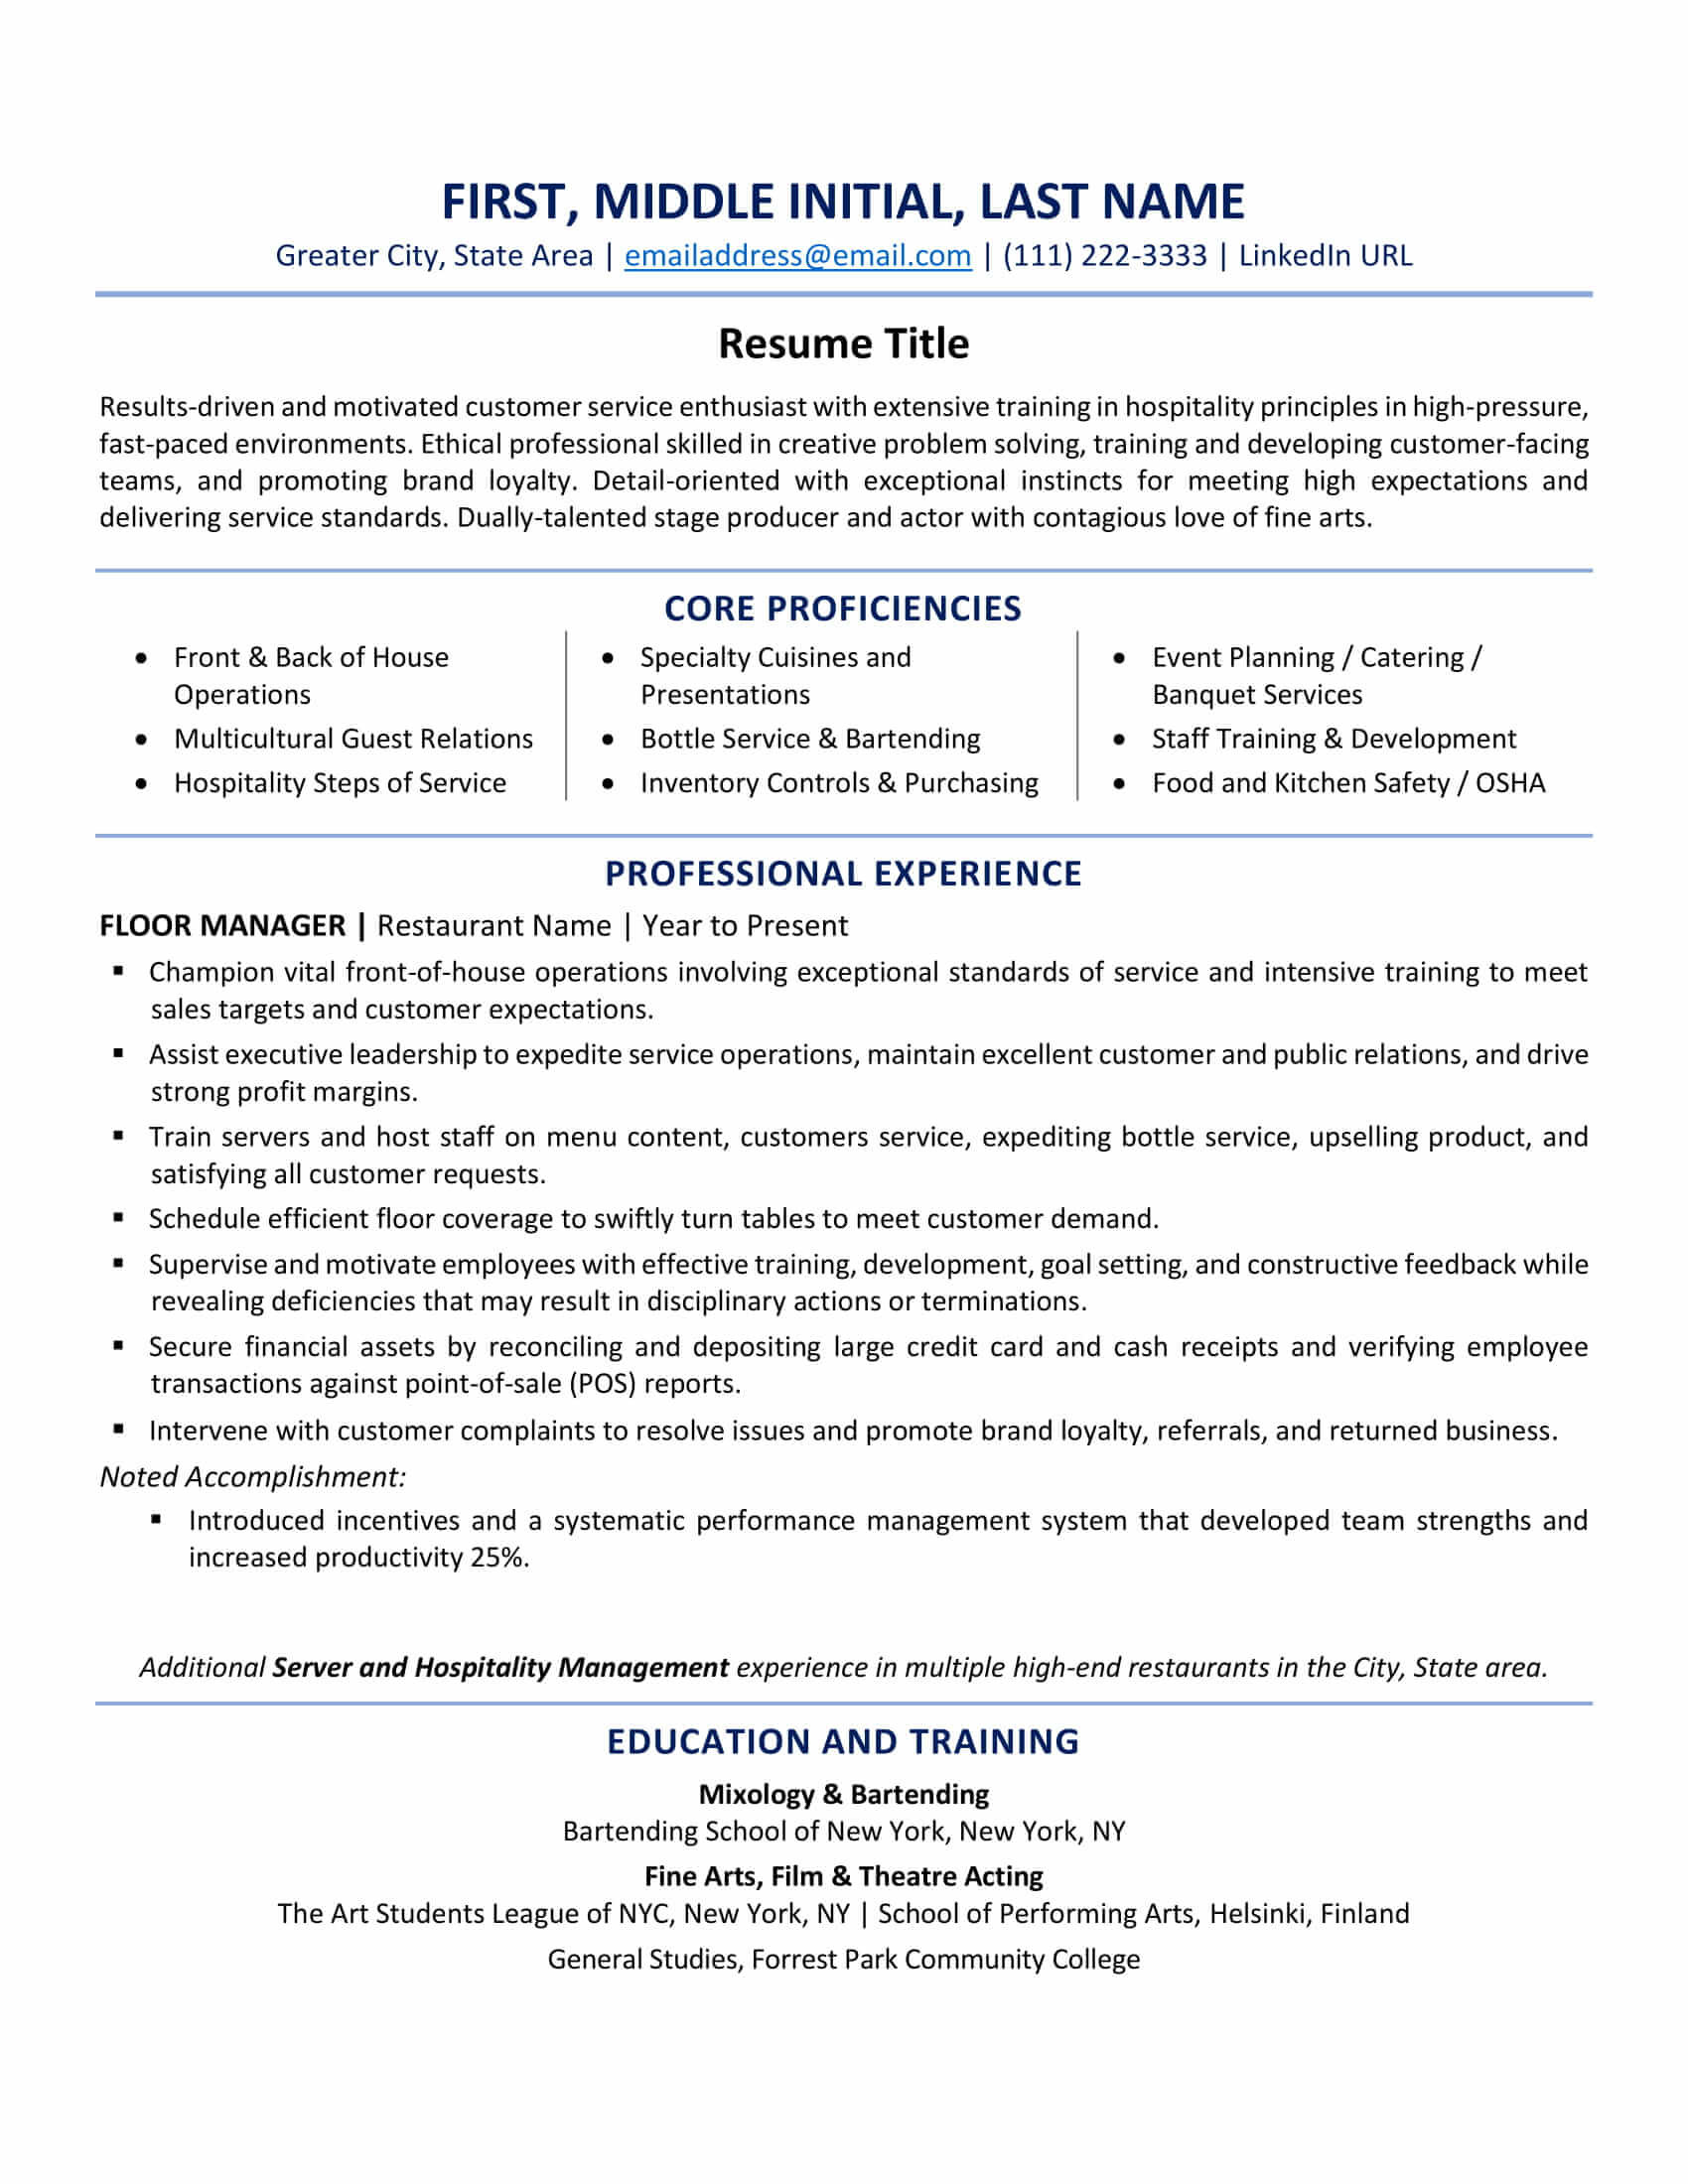 resume tips for older workers